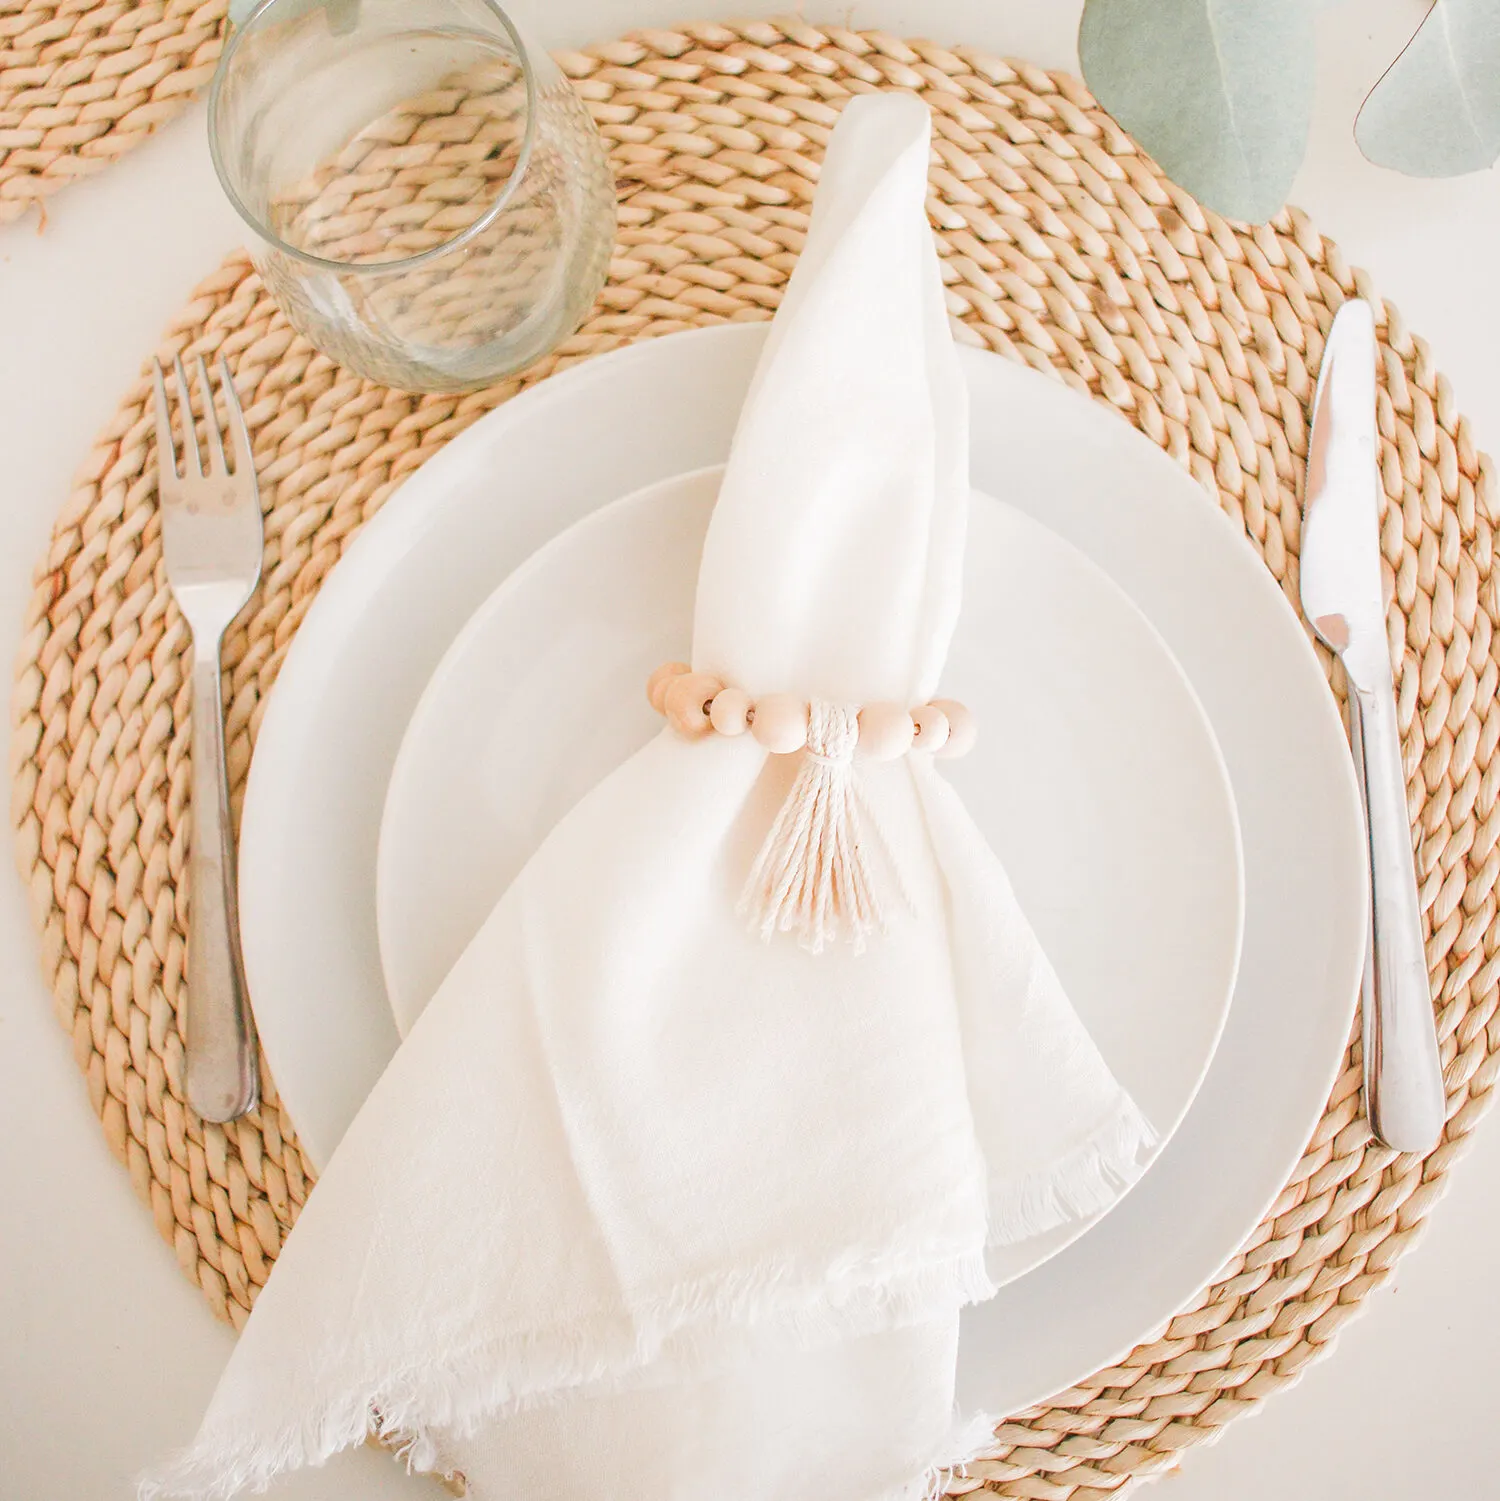 DIY Clay Napkin Rings - The Merrythought